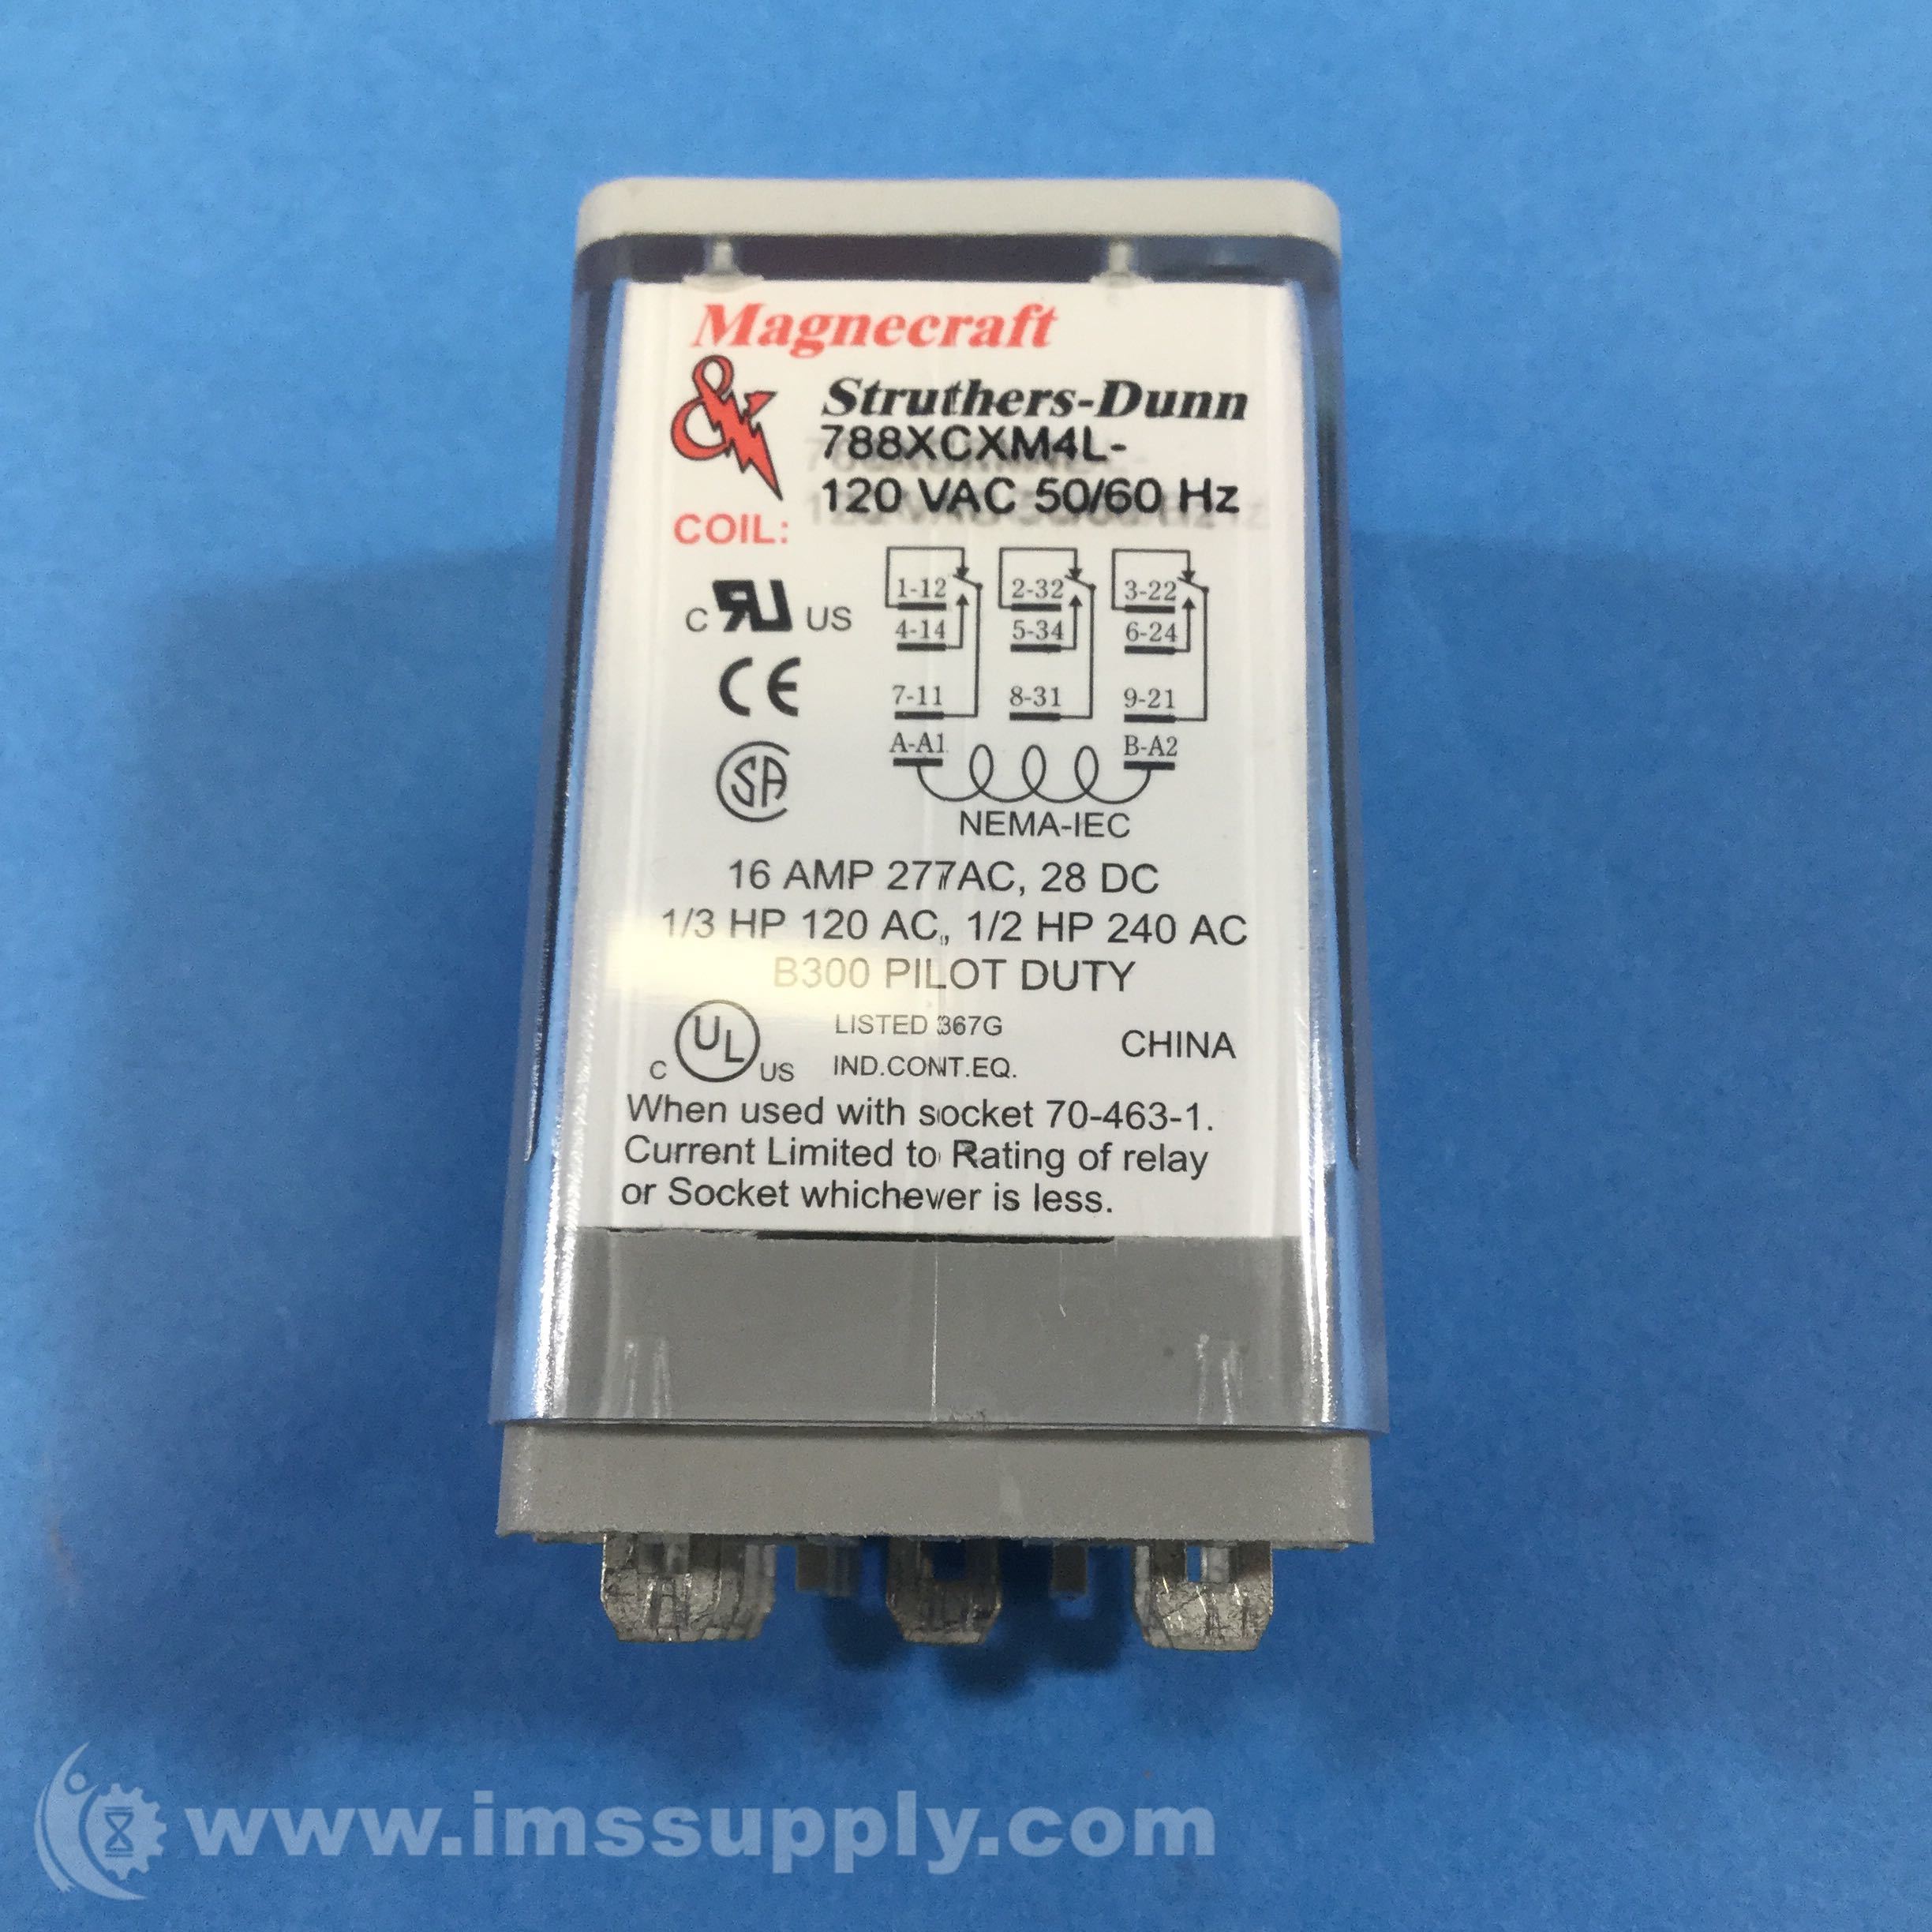 New Magnecraft Struthers-Dunn Relay 788XBXM4L-24VDC 